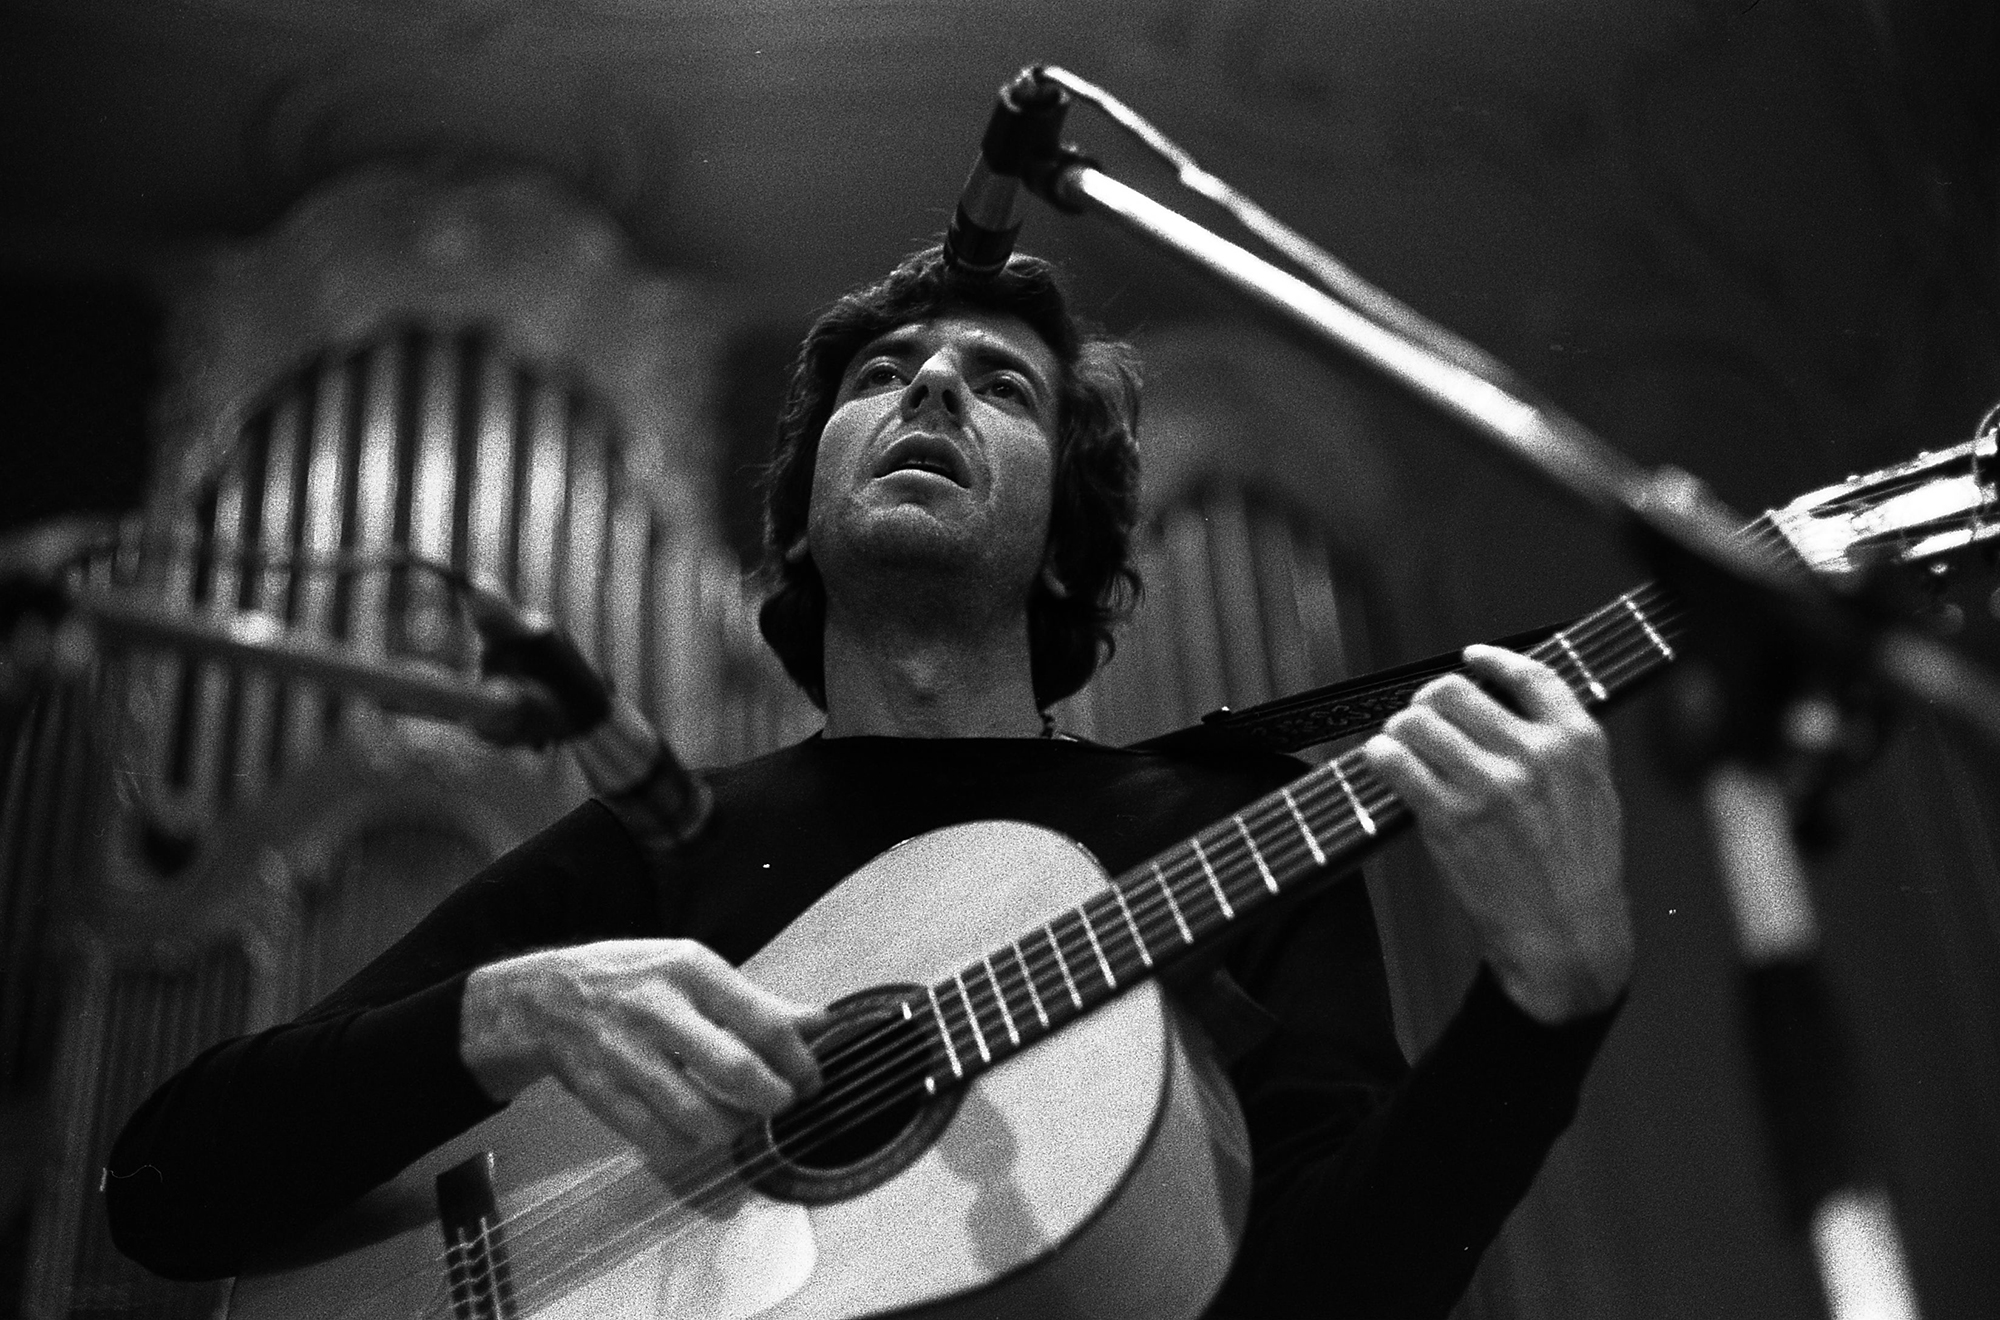 Leonard Cohen performs at the Musikhalle on May 4, 1970 in Hamburg, Germany.